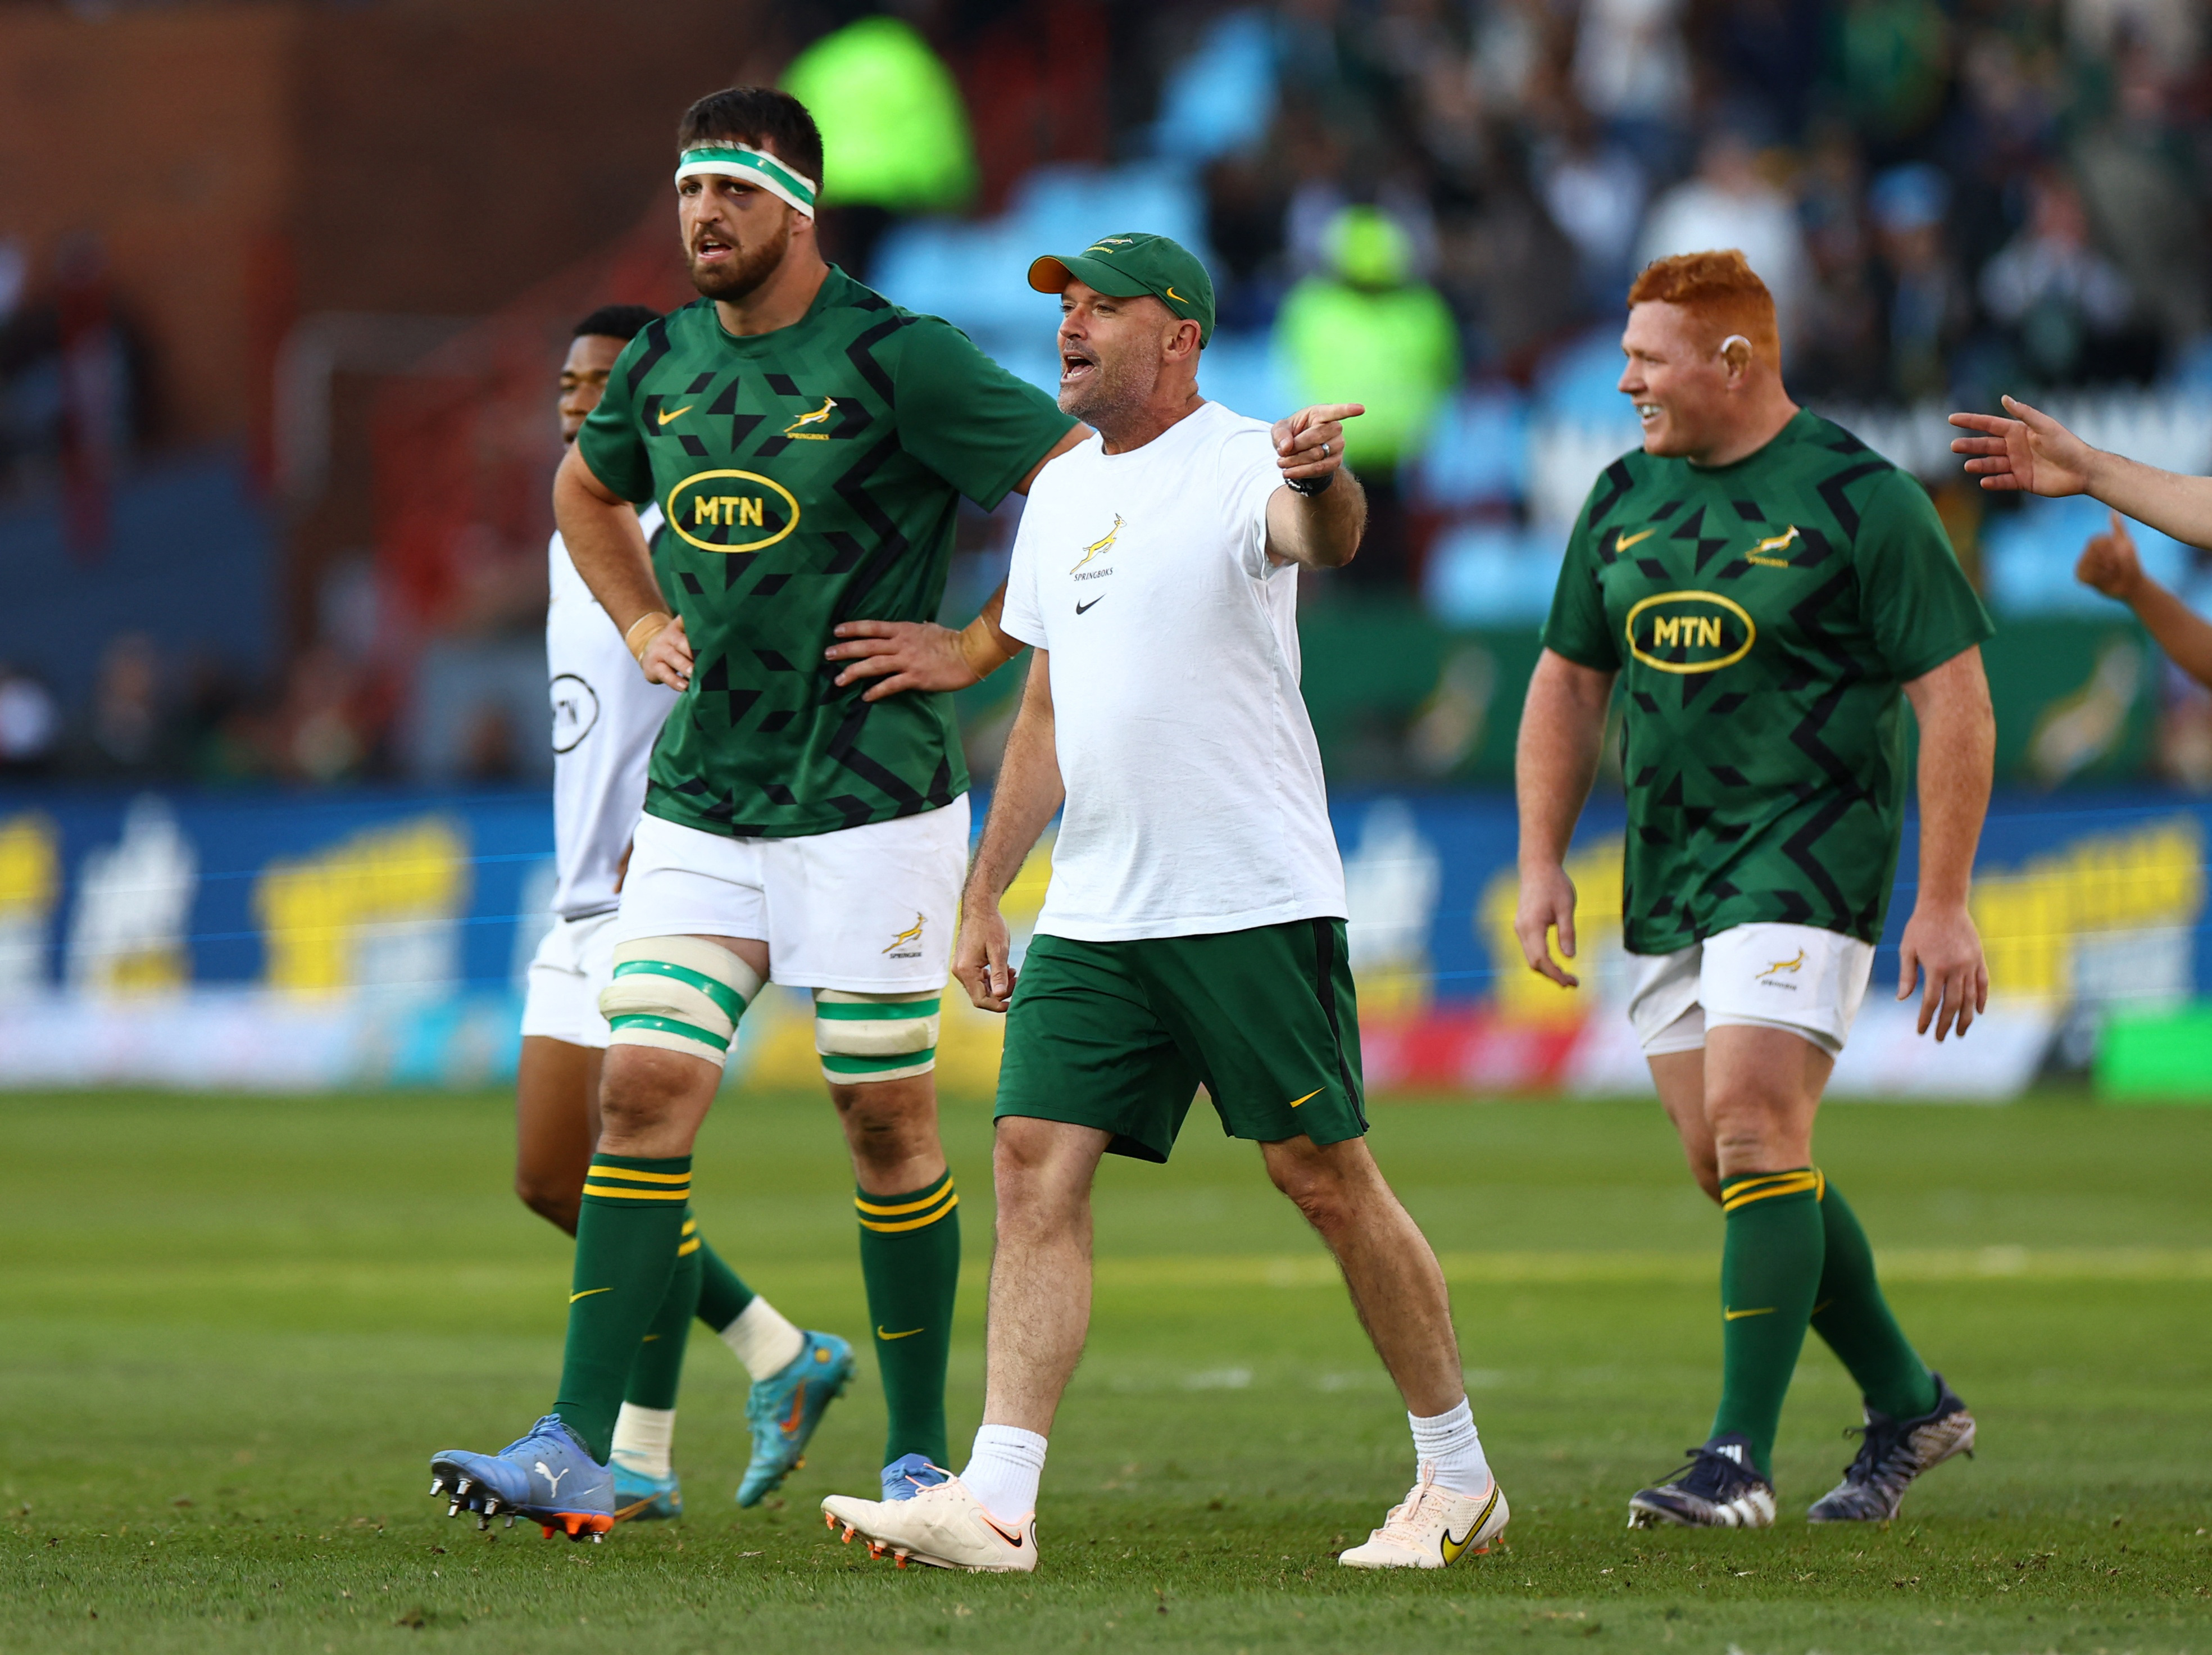 Springboks wont hold back in World Cup warm-up test against Wales Reuters